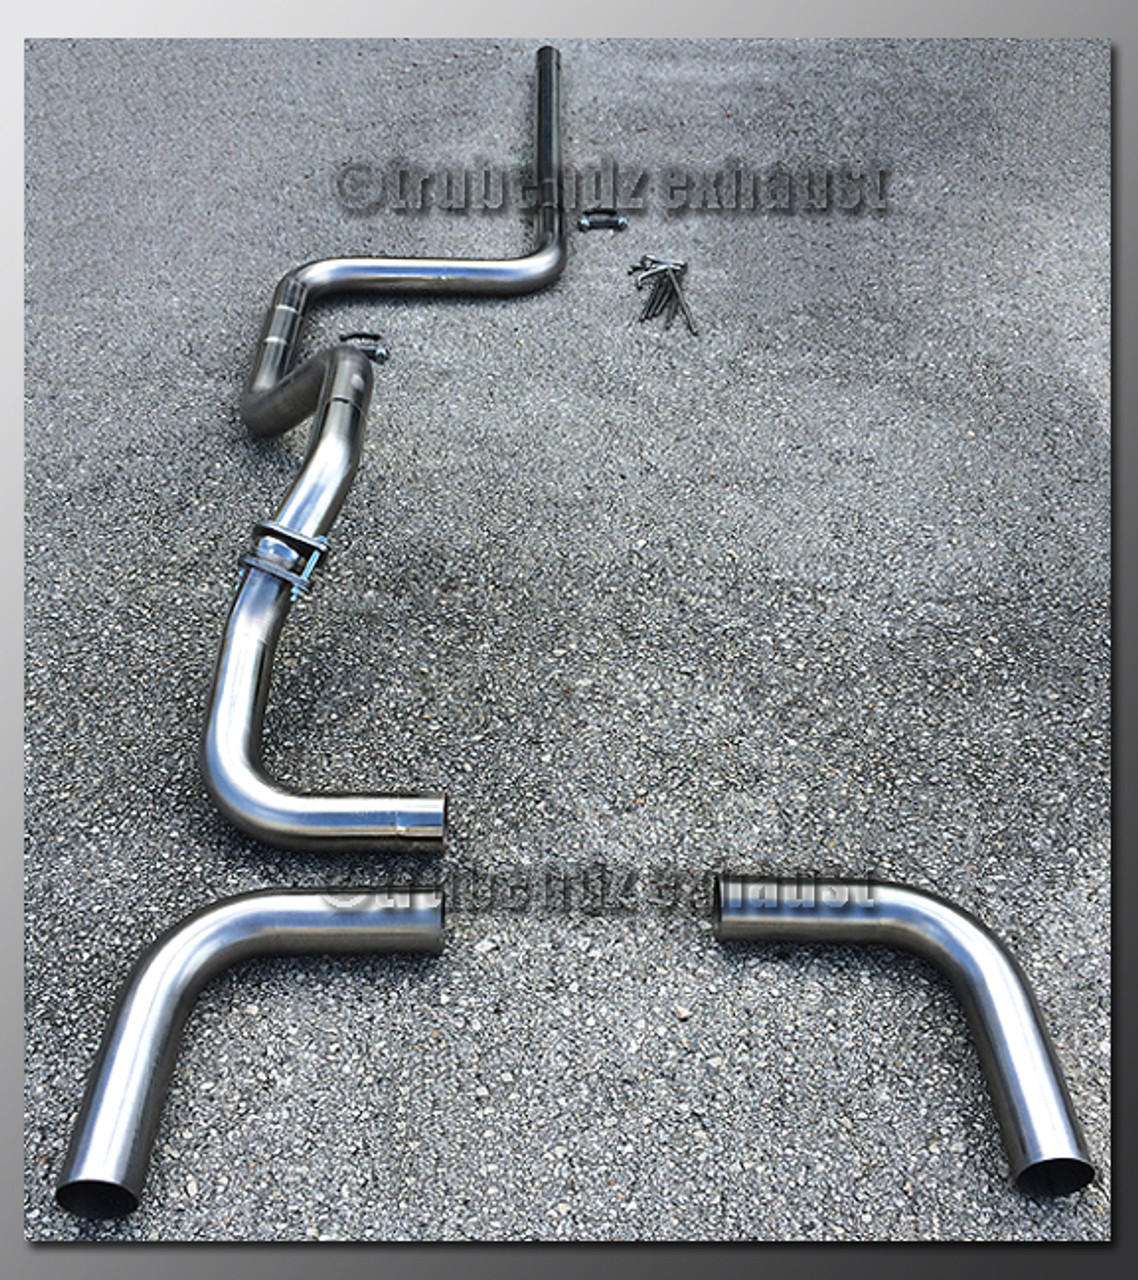 03-05 Dodge SRT-4 Dual Exhaust Tubing - 2.5 Inch 304 Stainless